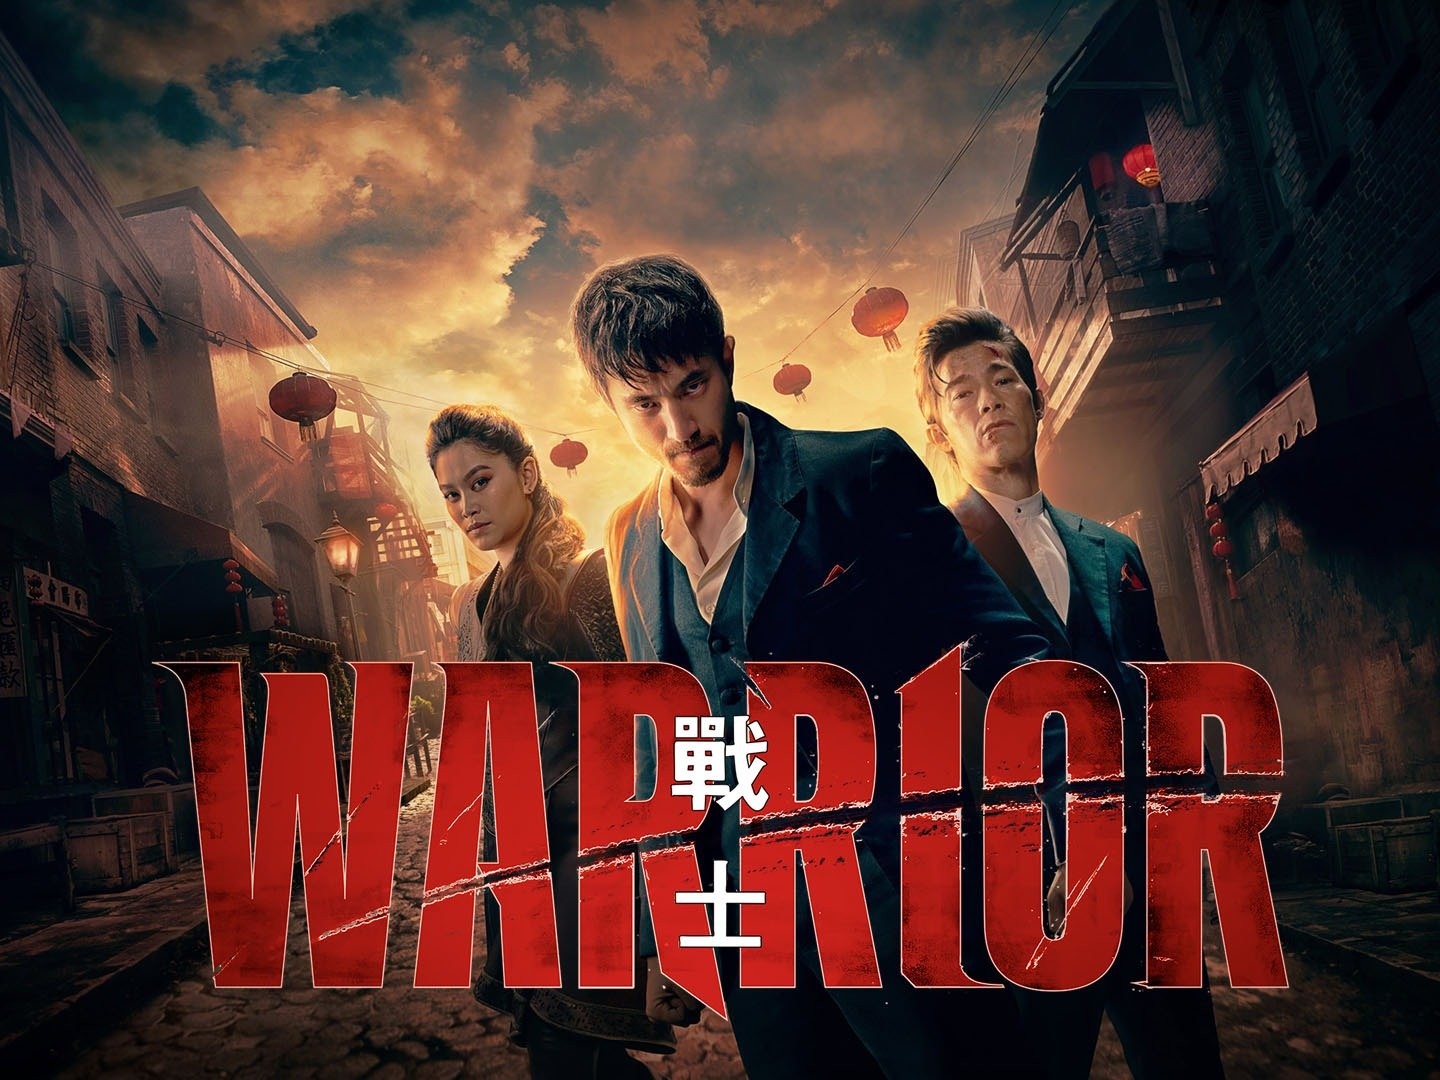 IT'S HERE! Warrior season 3 official trailer. So greatful to be a